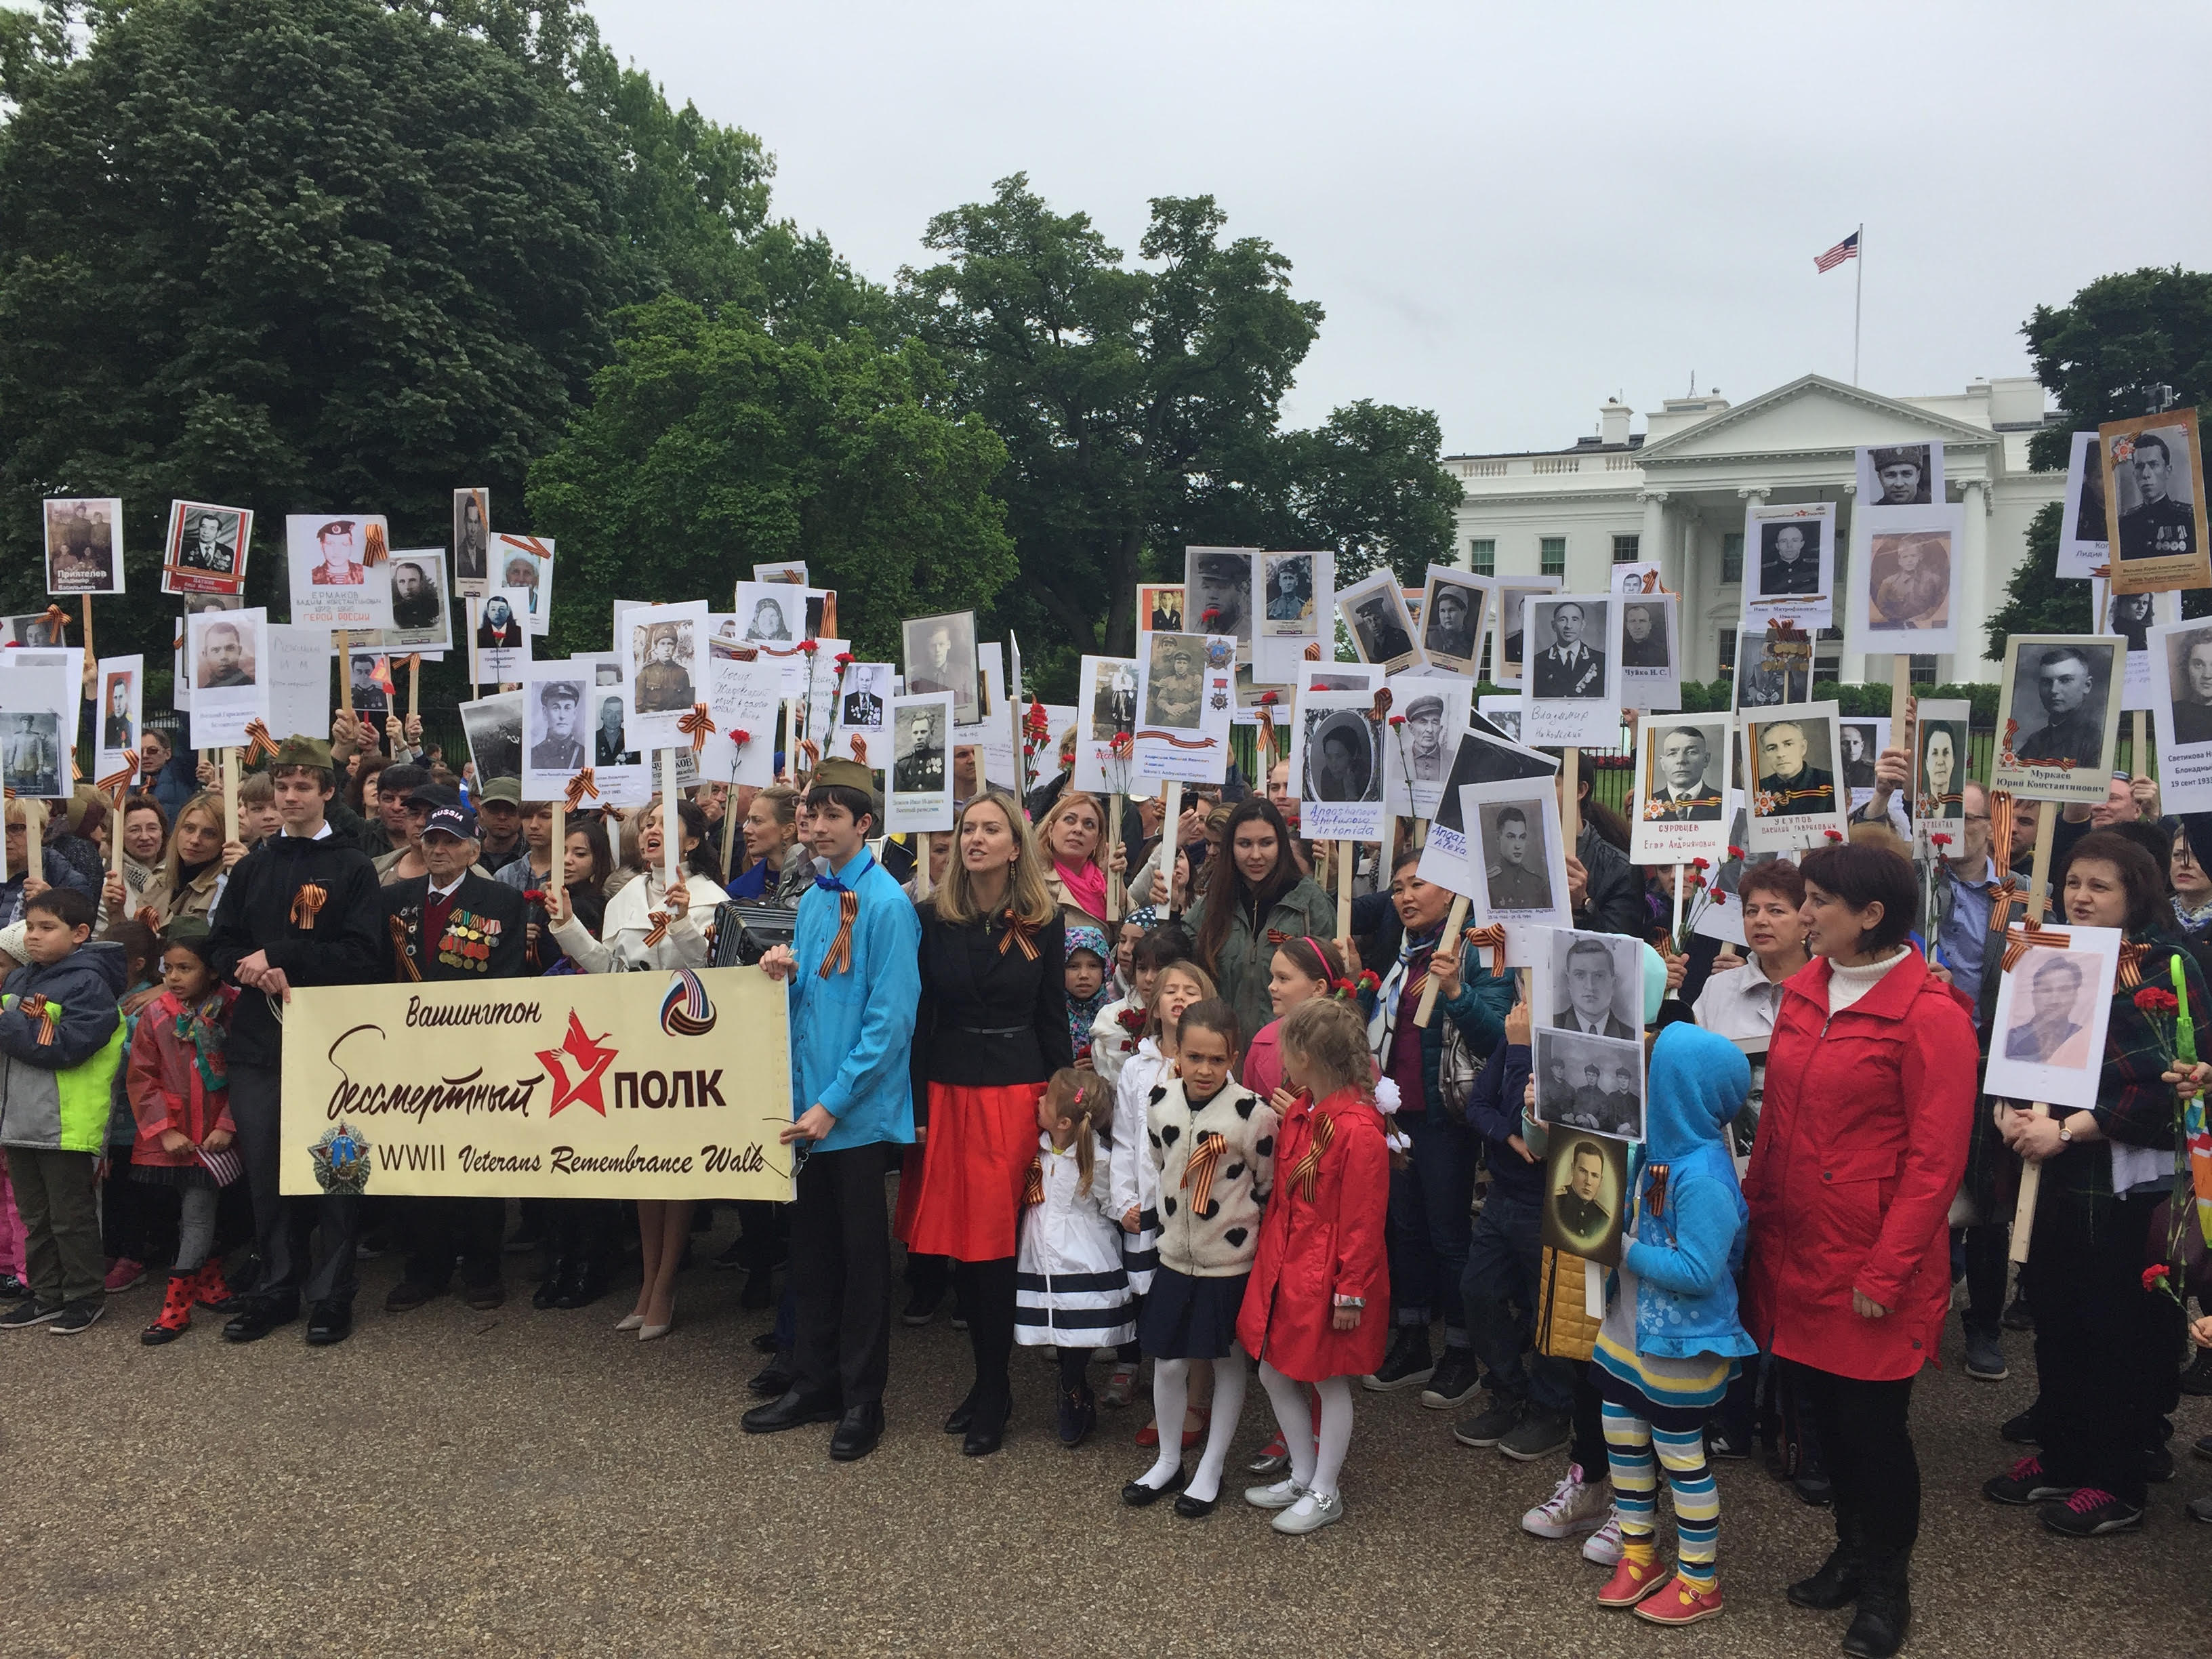 In Washington DC, the downtown area was closed for the Immortal regiment’s march. The procession started at the White House and ended at the WWII memorial on the National Mall park. About 450 people turned up.